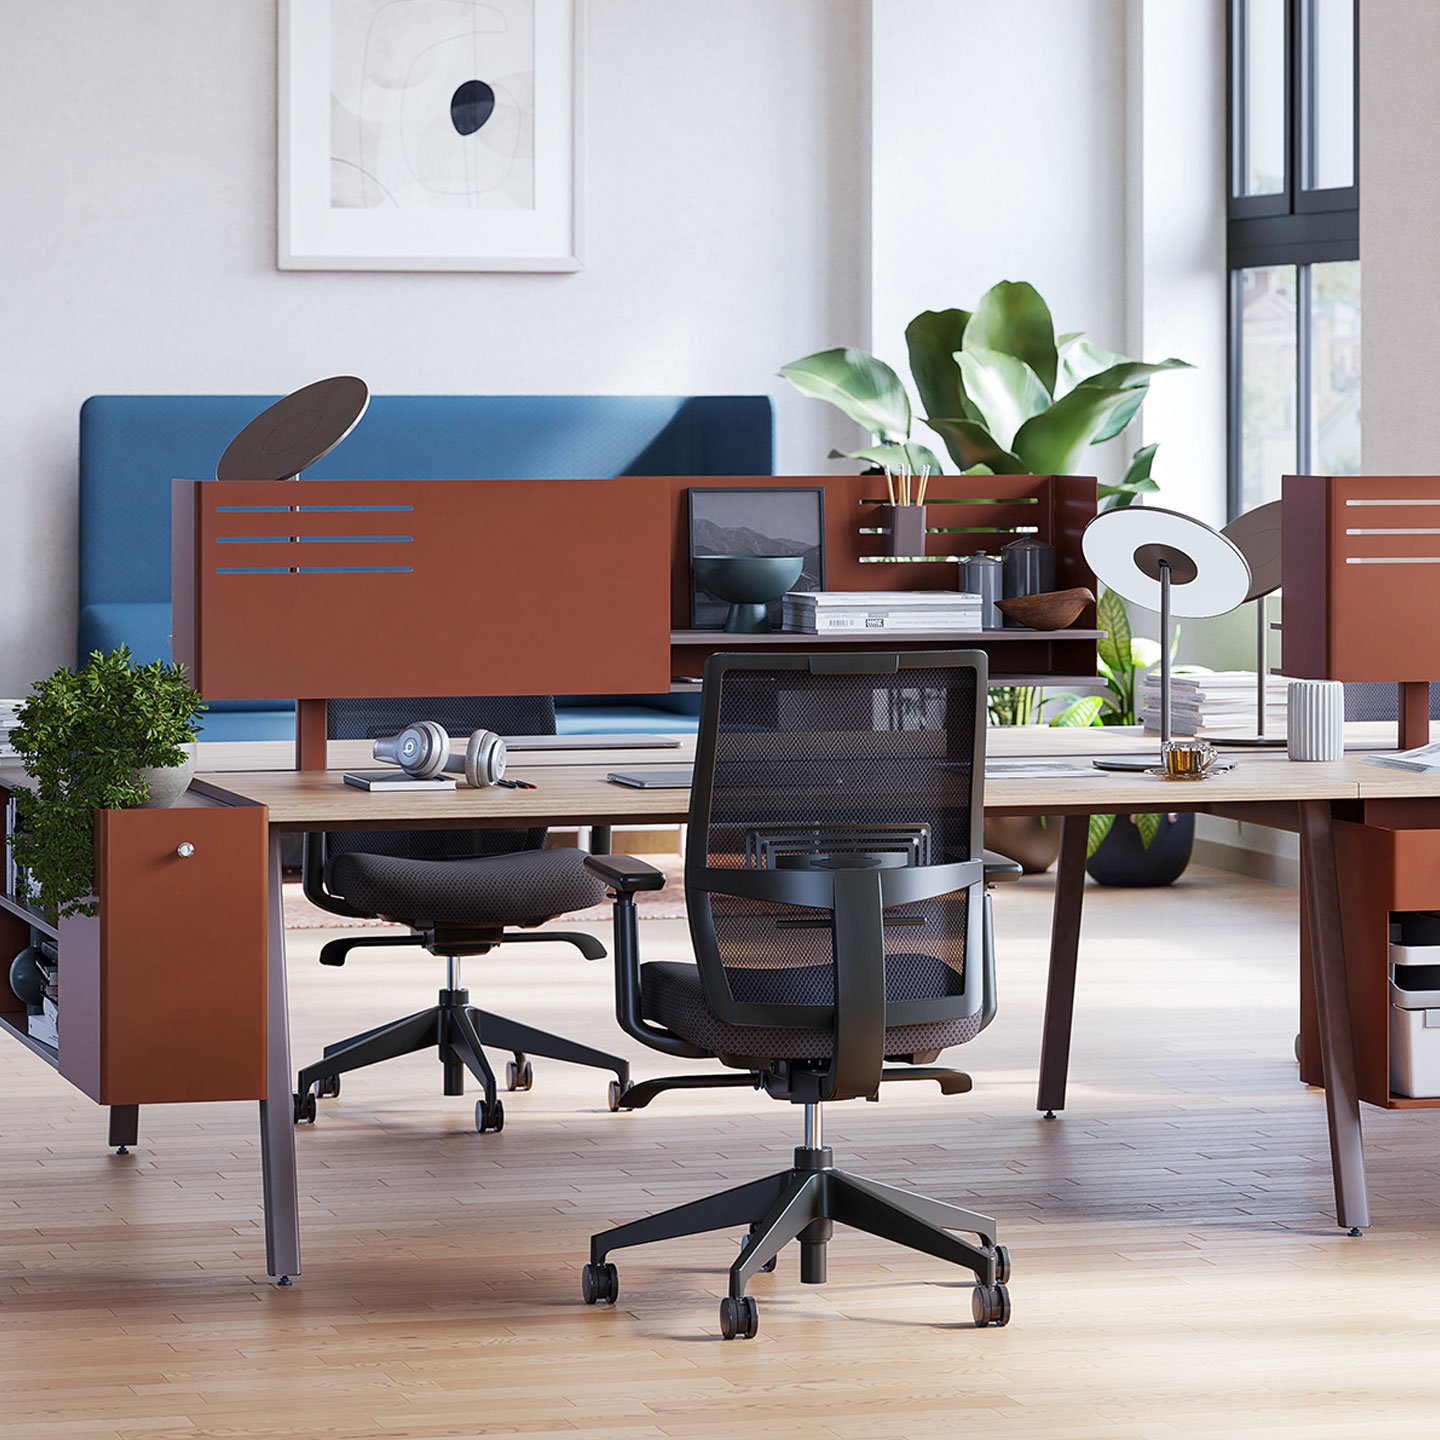 Aloha Active office chair in a workplace setting